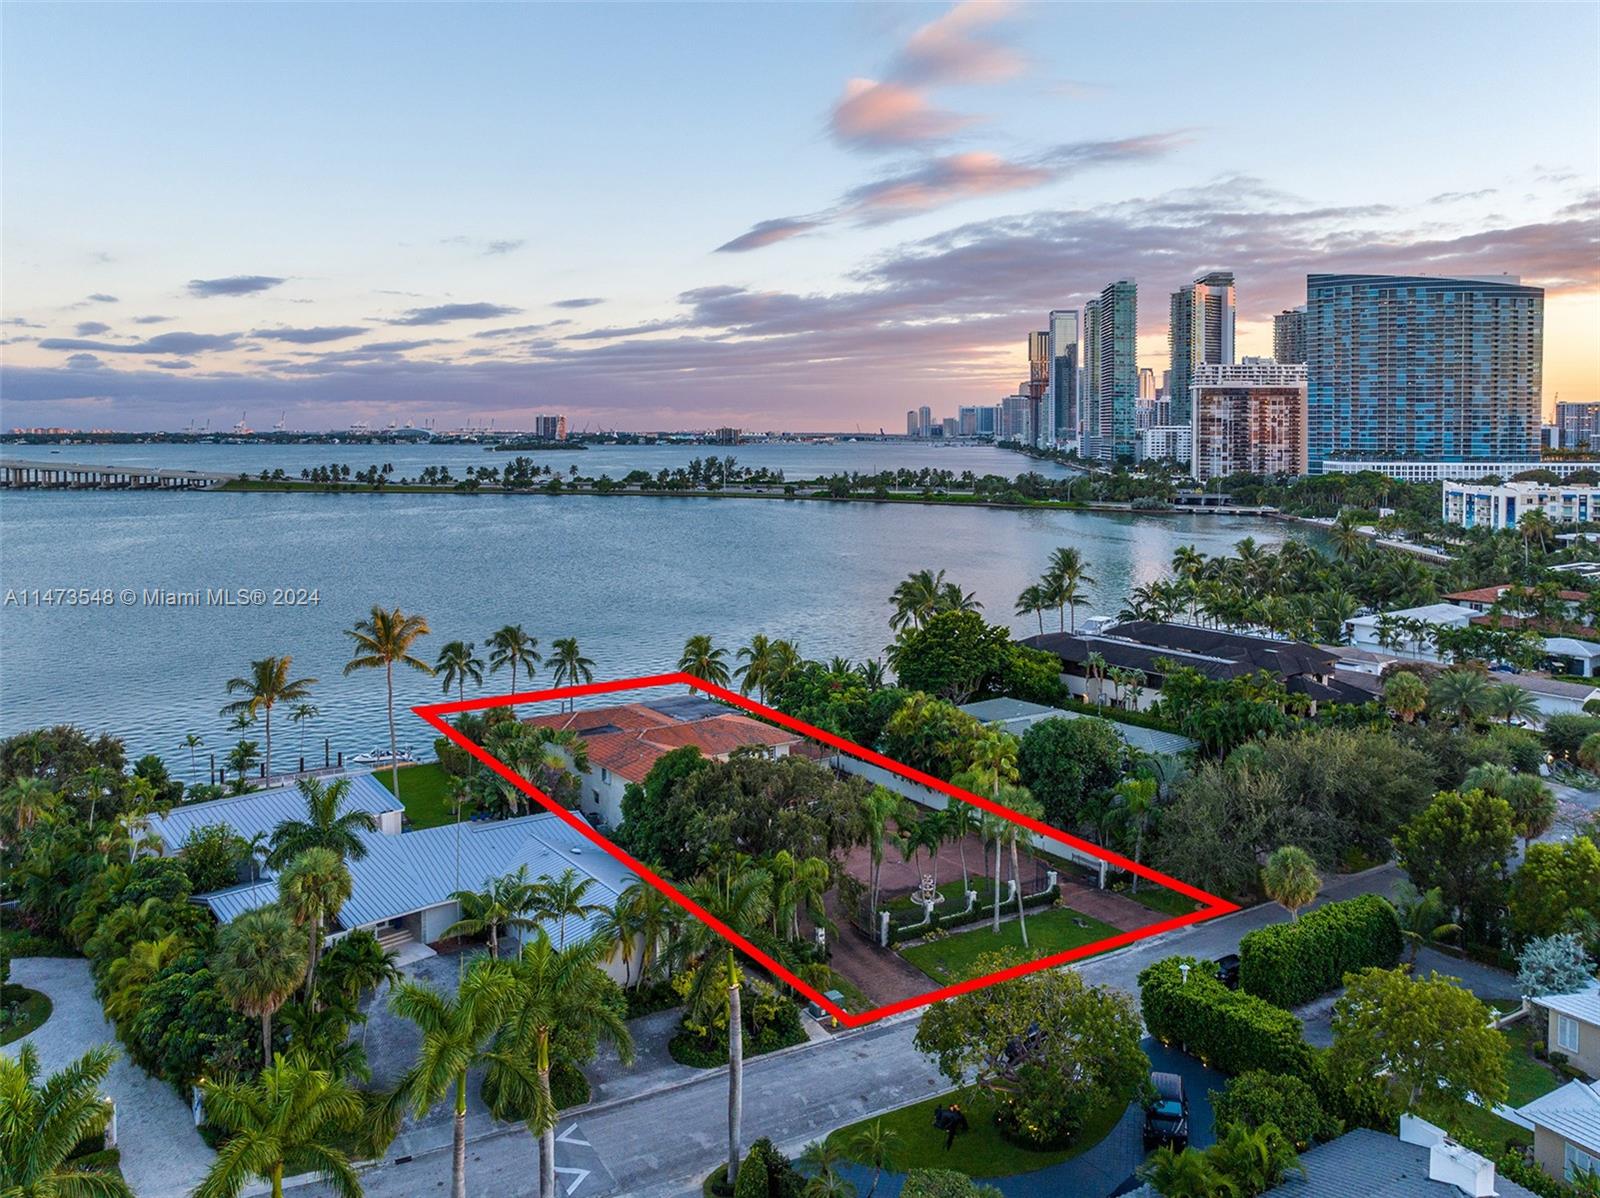 One-of-a-kind offering in the coveted gated community of Bay Point. SE facing TROPHY property on 100' of unobstructed wide bayfront, with deep water dockage and 360-degree panoramic views of the Miami skyline. Existing structure/home can be torn down for customization of a grand, new masterpiece. Live in the most exclusive neighborhood in Miami just steps away from the beach, city, dining and shopping.